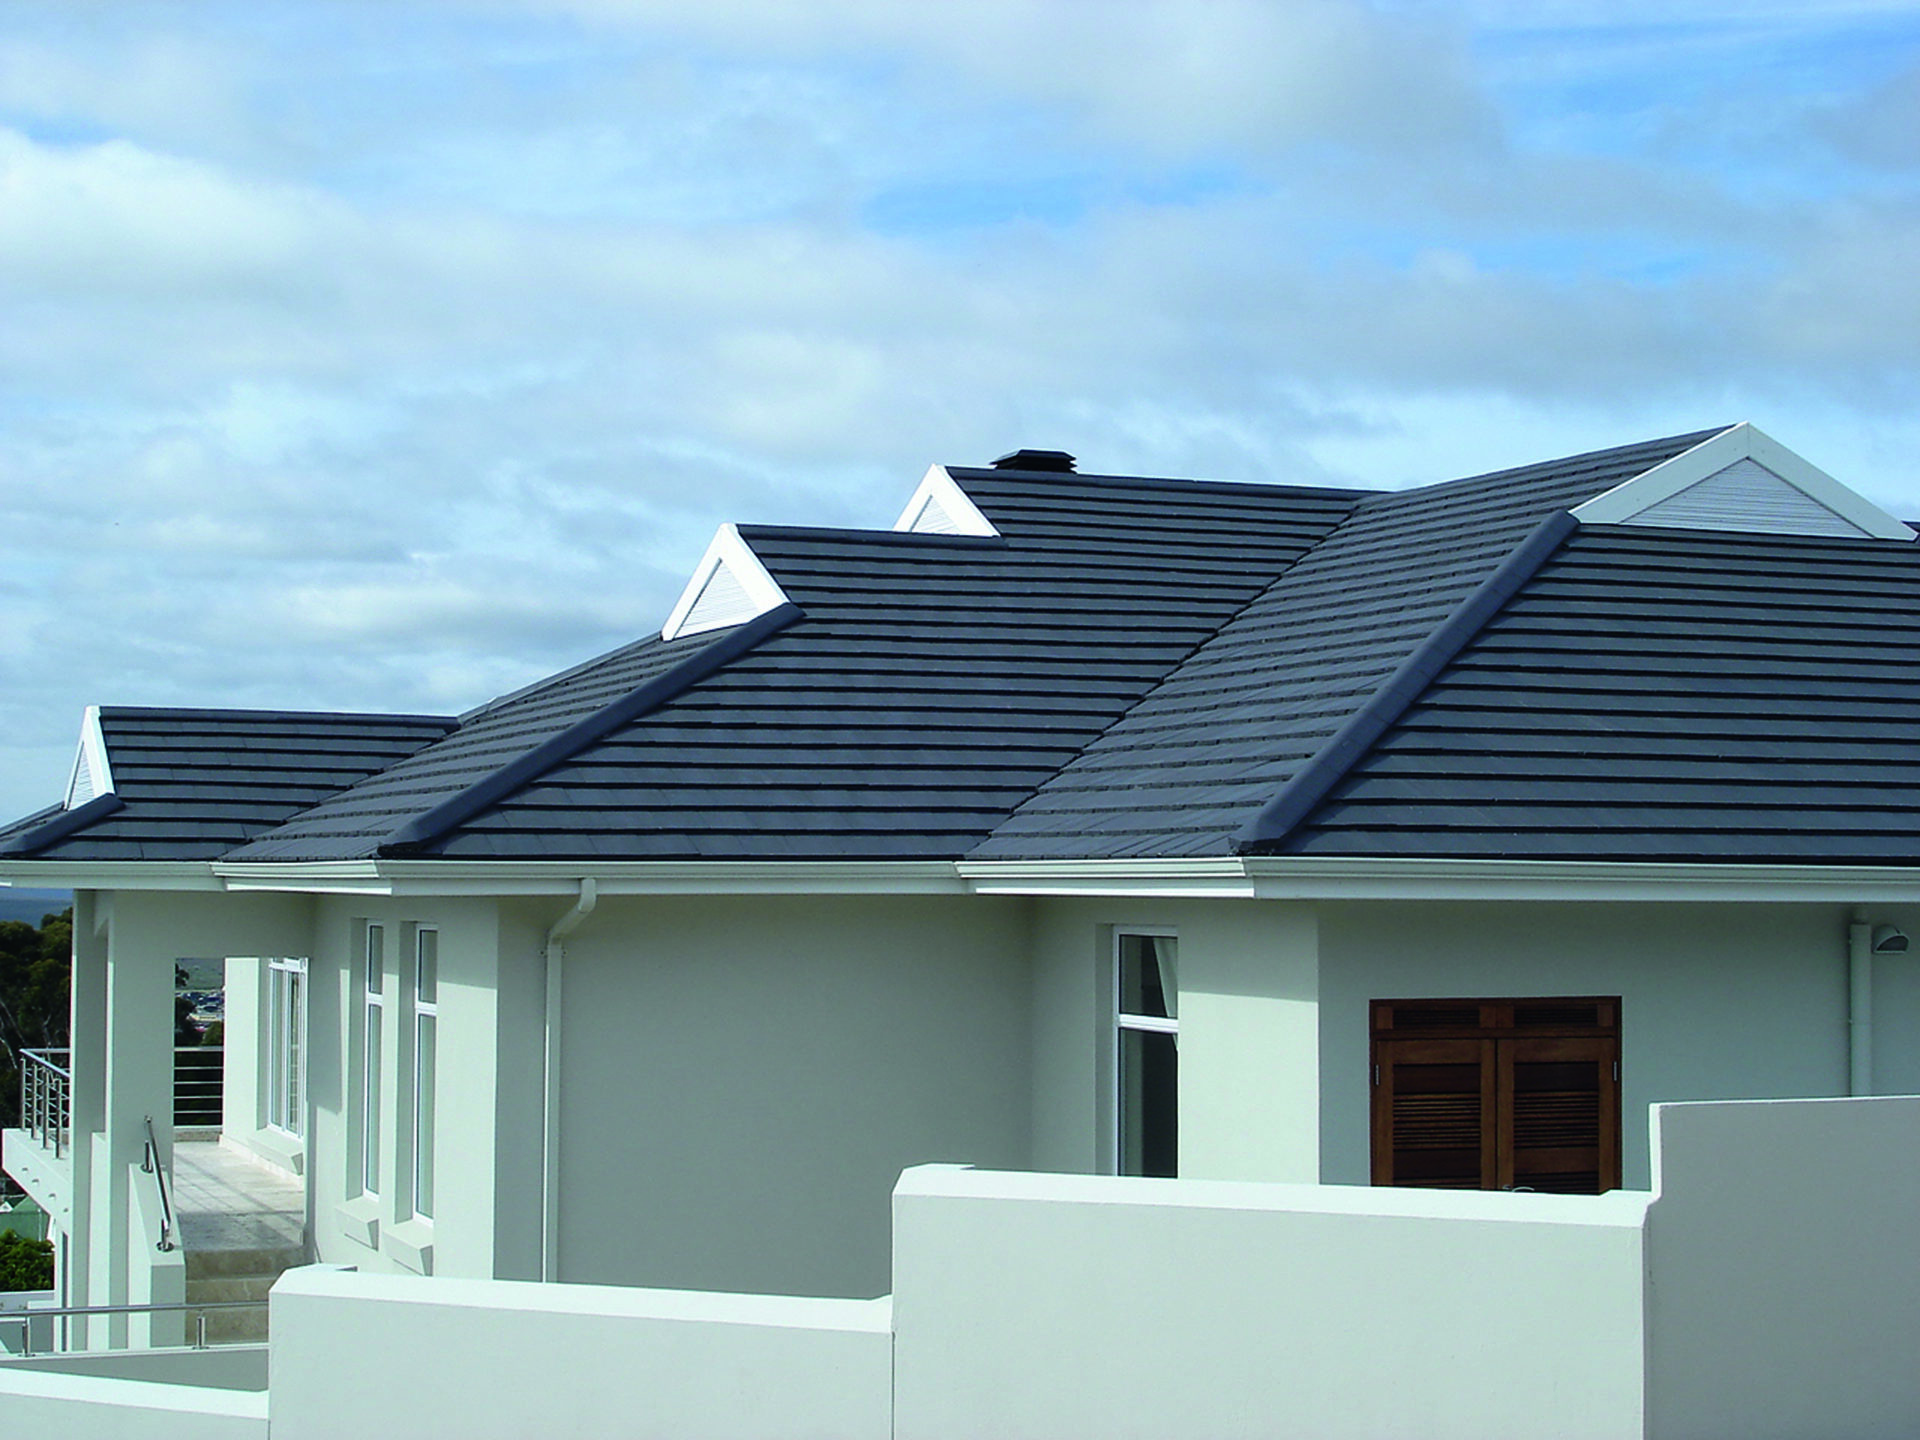 Concrete Roofing Tiles Prices In South Africa 